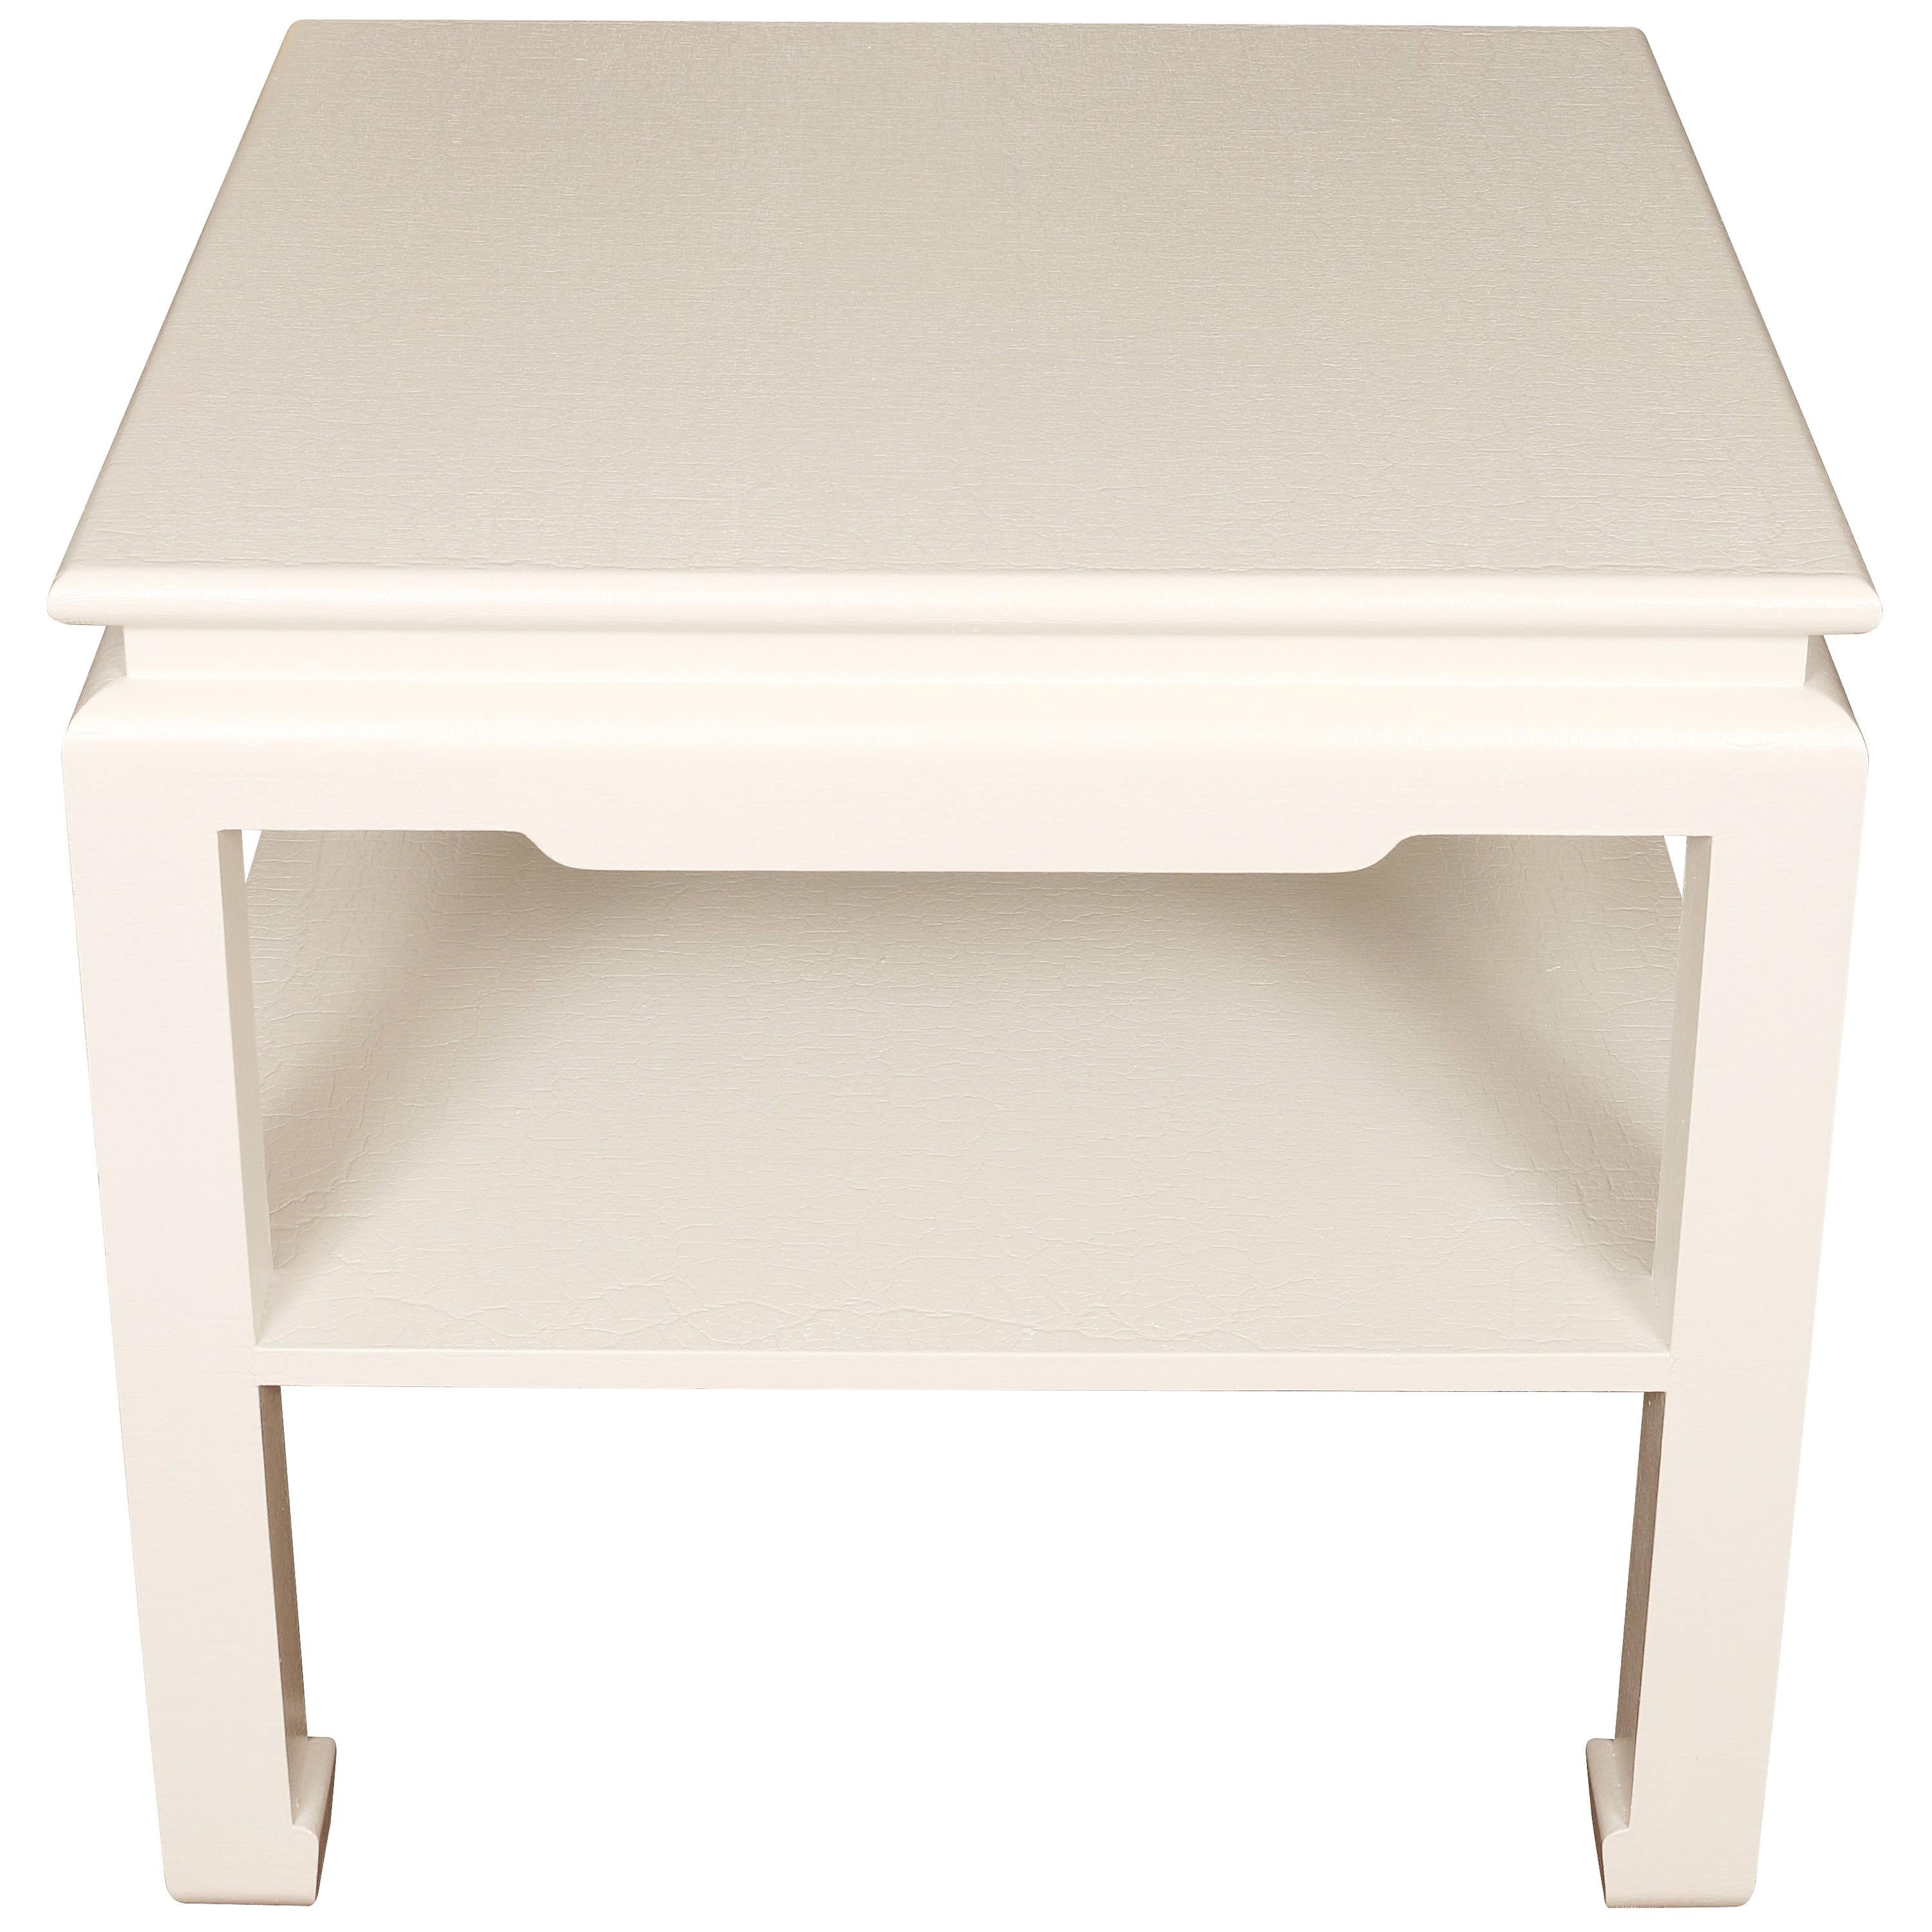 Vintage Karl Springer Style White Two-Tiered Side Table